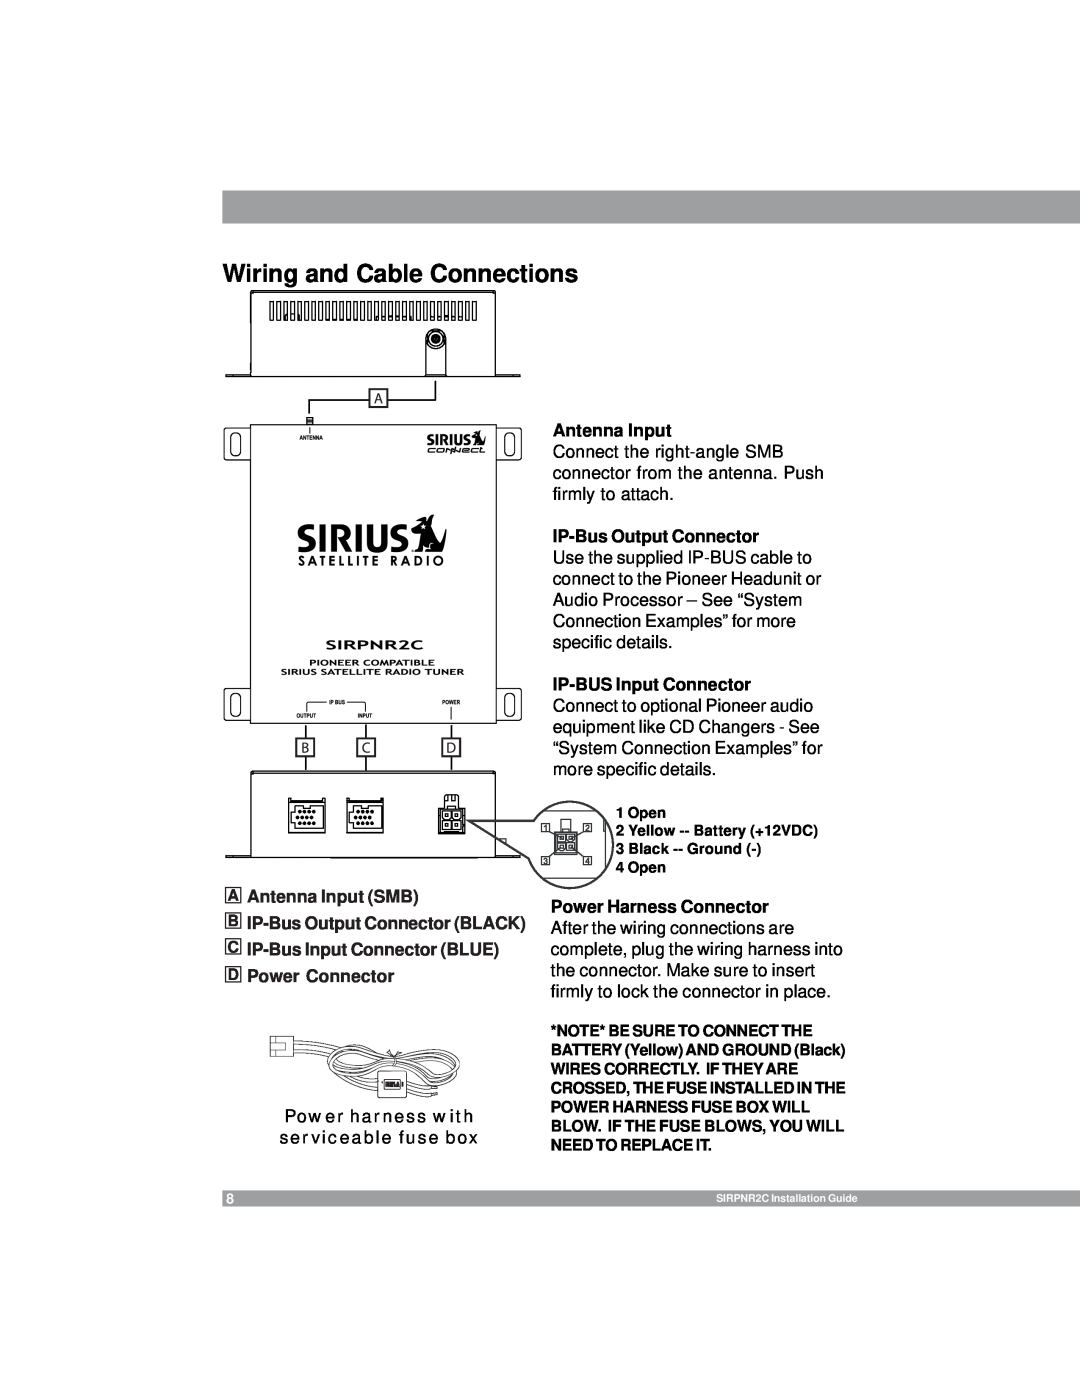 Sirius Satellite Radio SIRPNR2C manual Wiring and Cable Connections, Power harness with serviceable fuse box, Antenna Input 